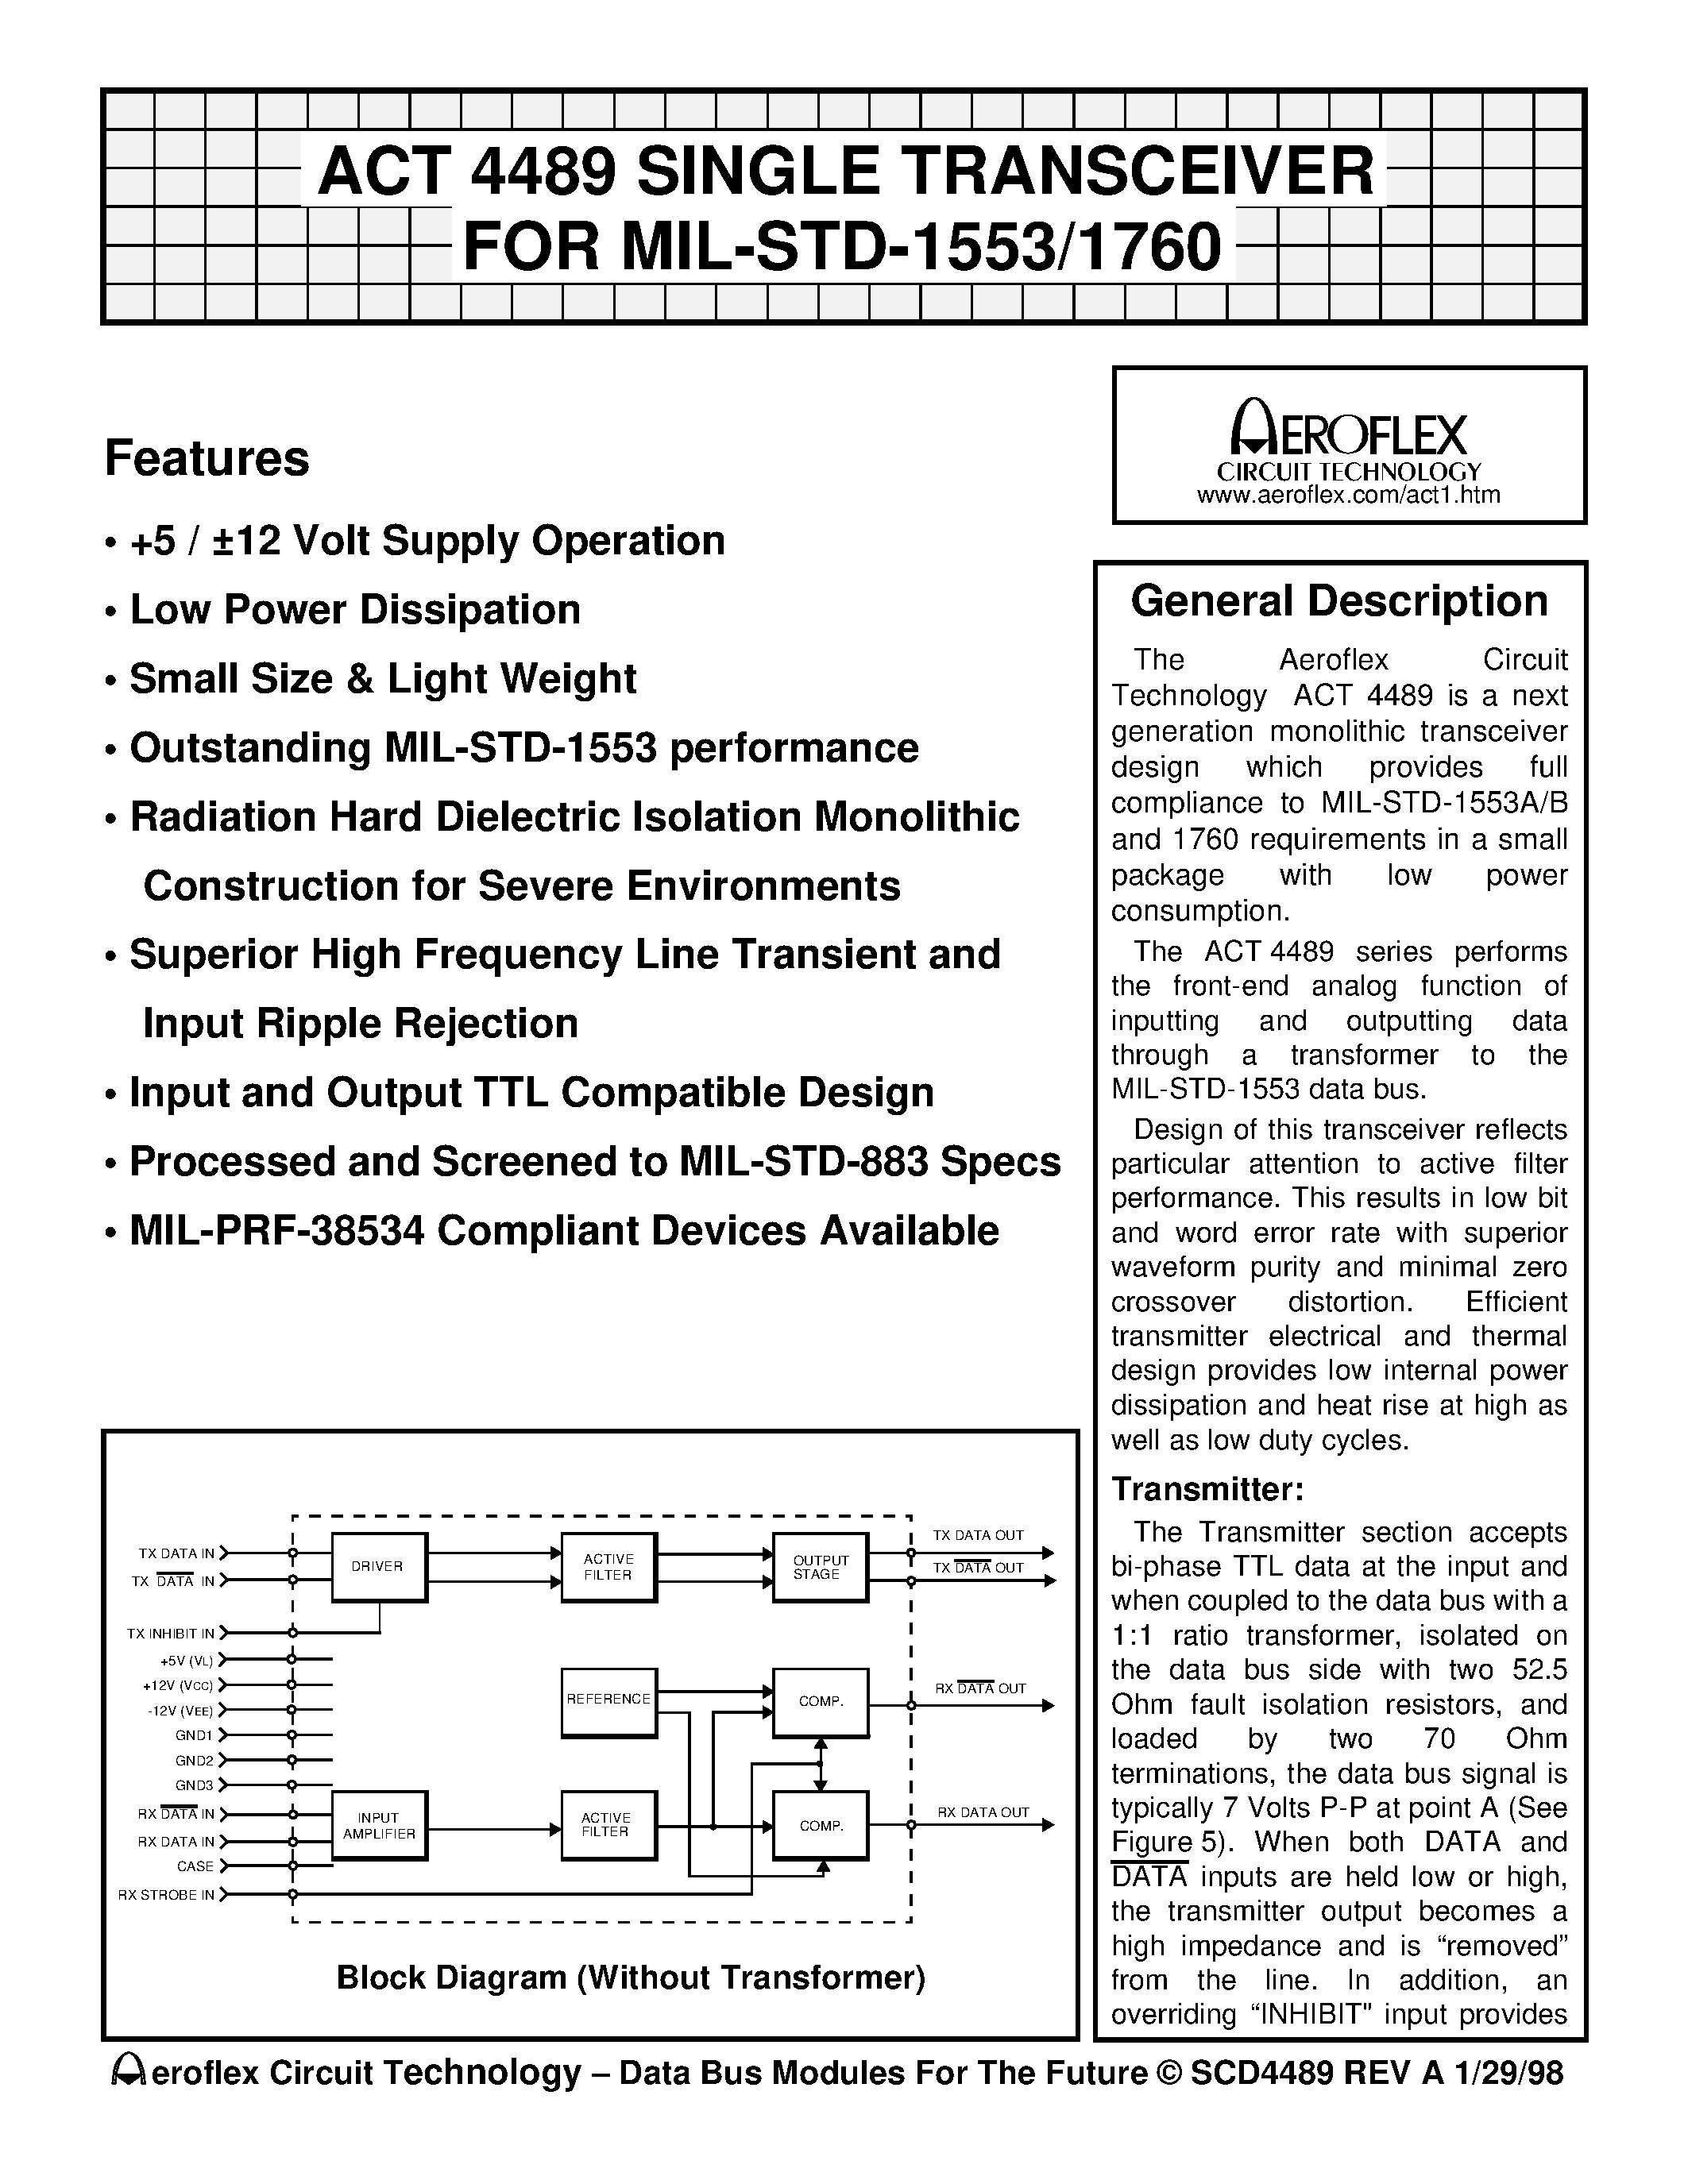 Datasheet ACT4489-F - ACT 4489 SINGLE TRANSCEIVER FOR MIL-STD-1553/1760 page 1